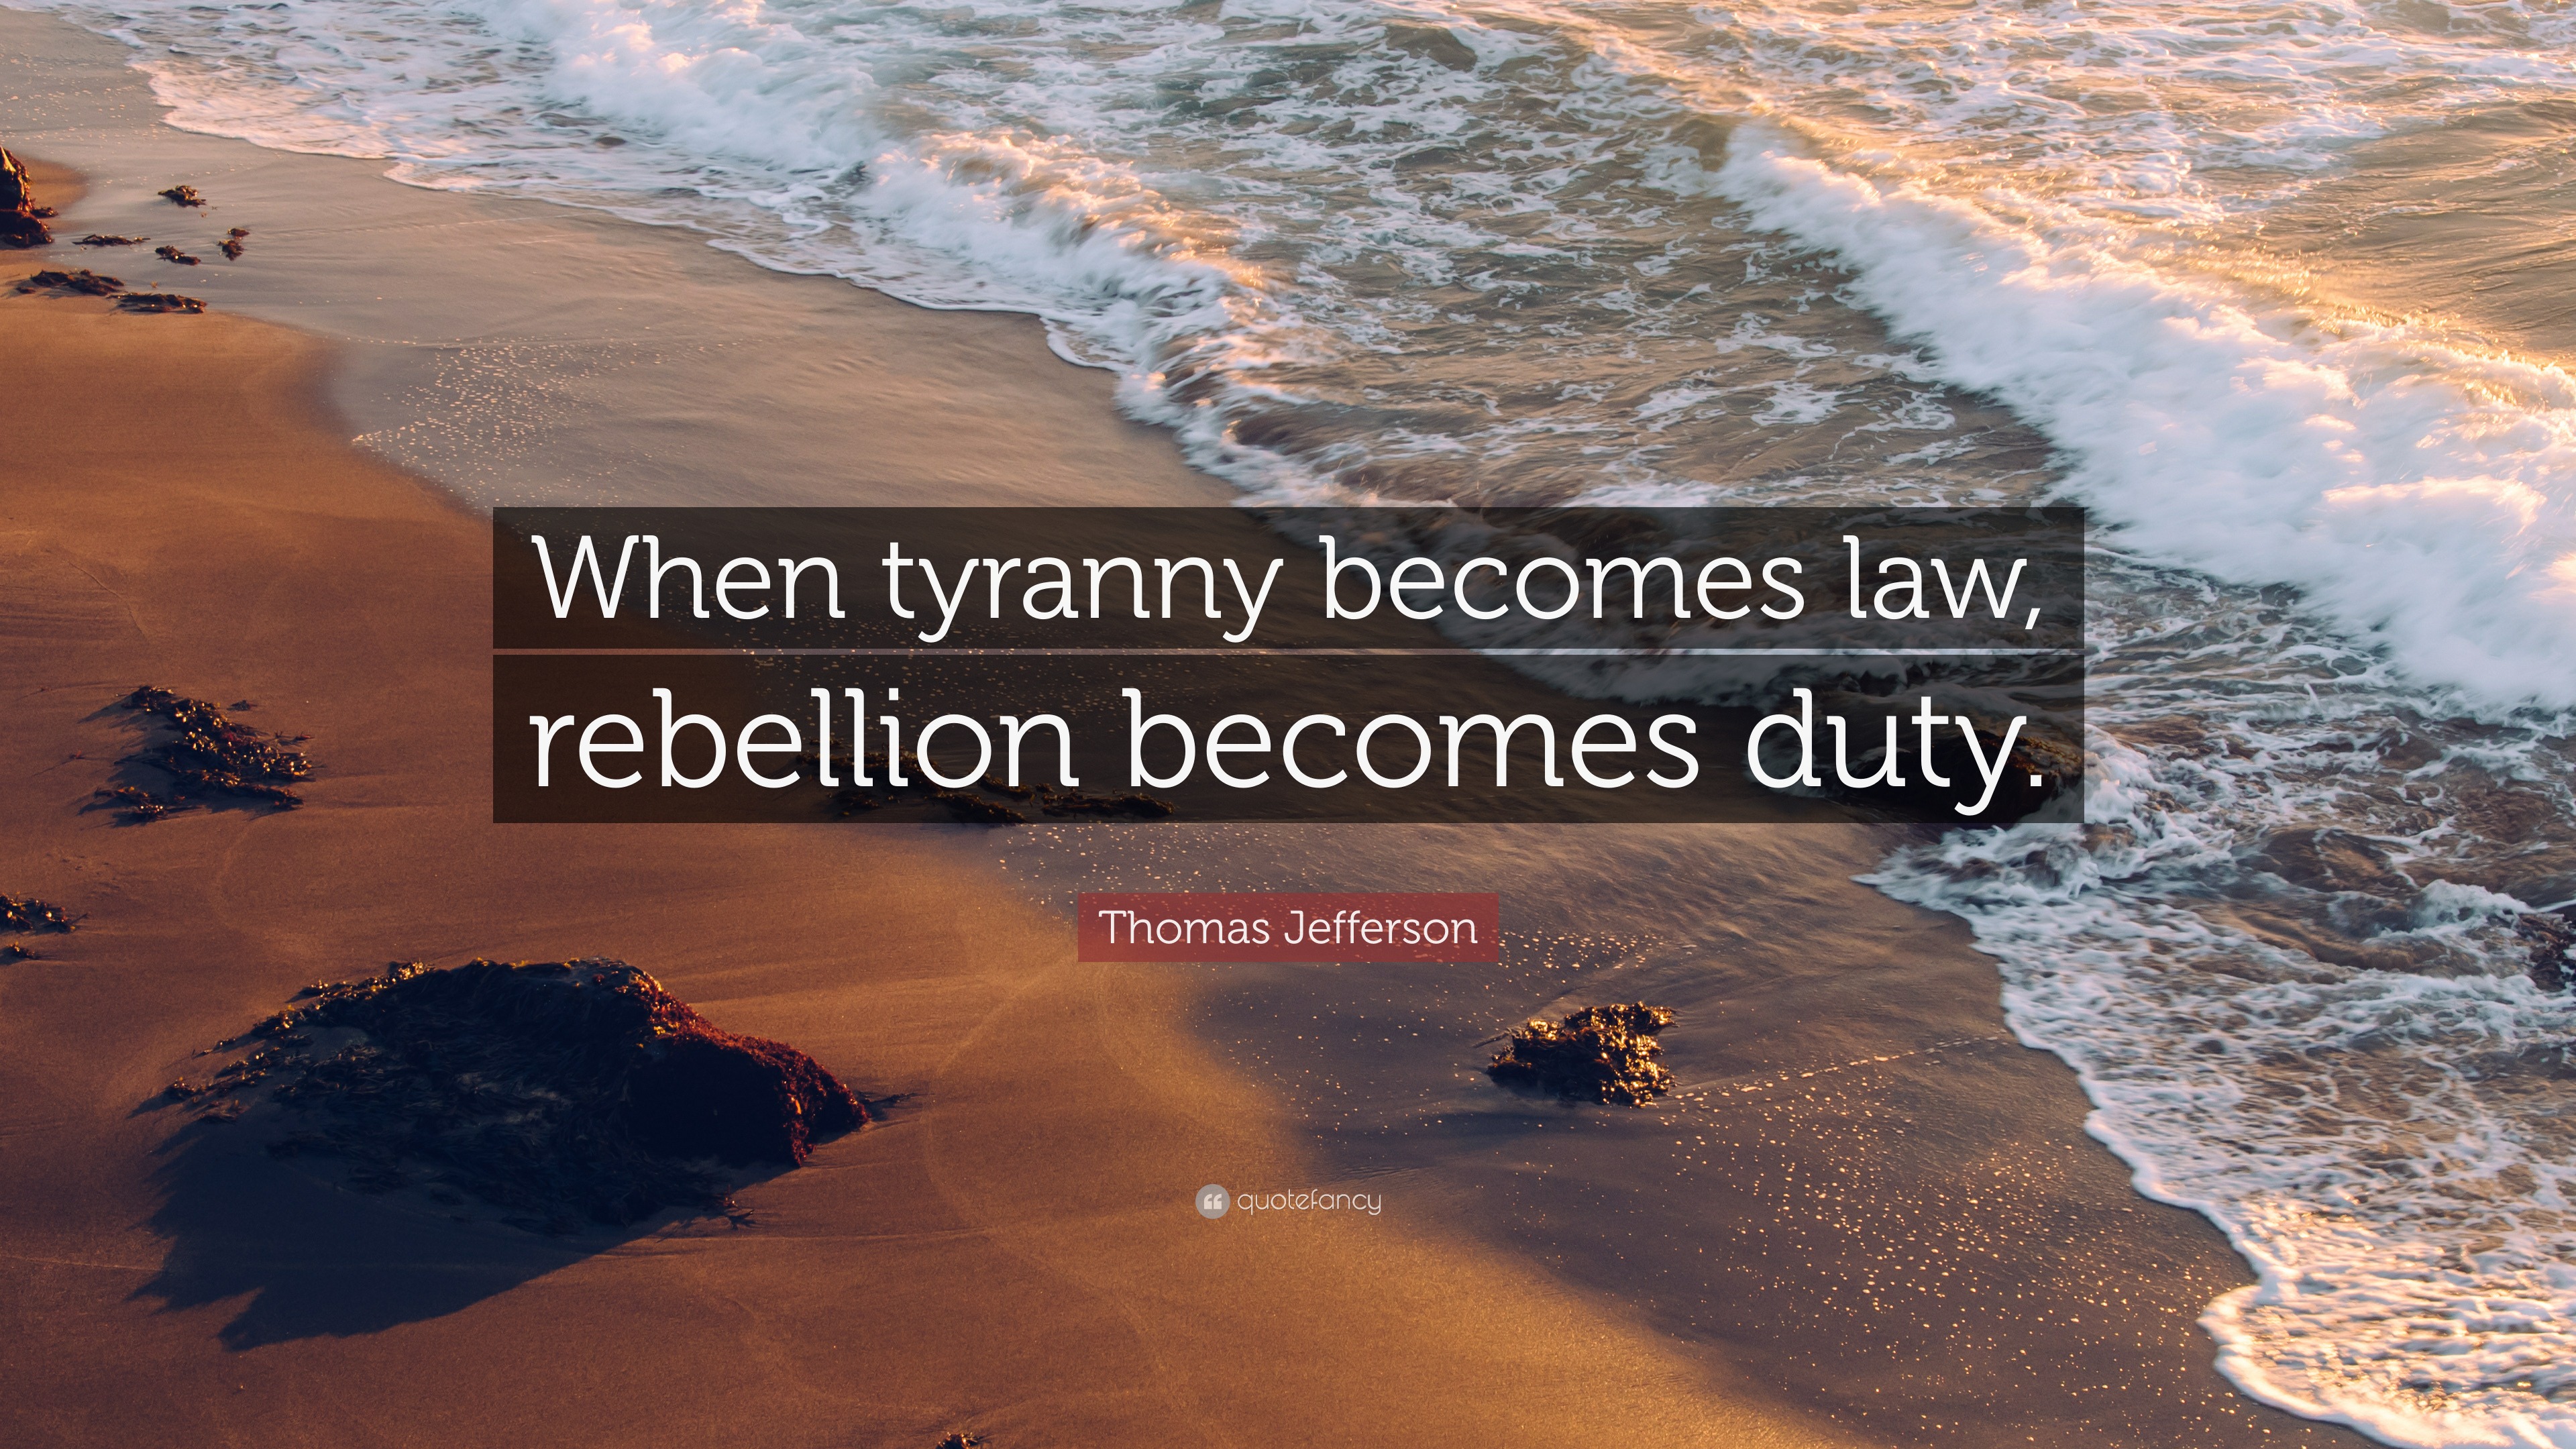 Thomas Jefferson Quote: “When tyranny becomes law, rebellion becomes